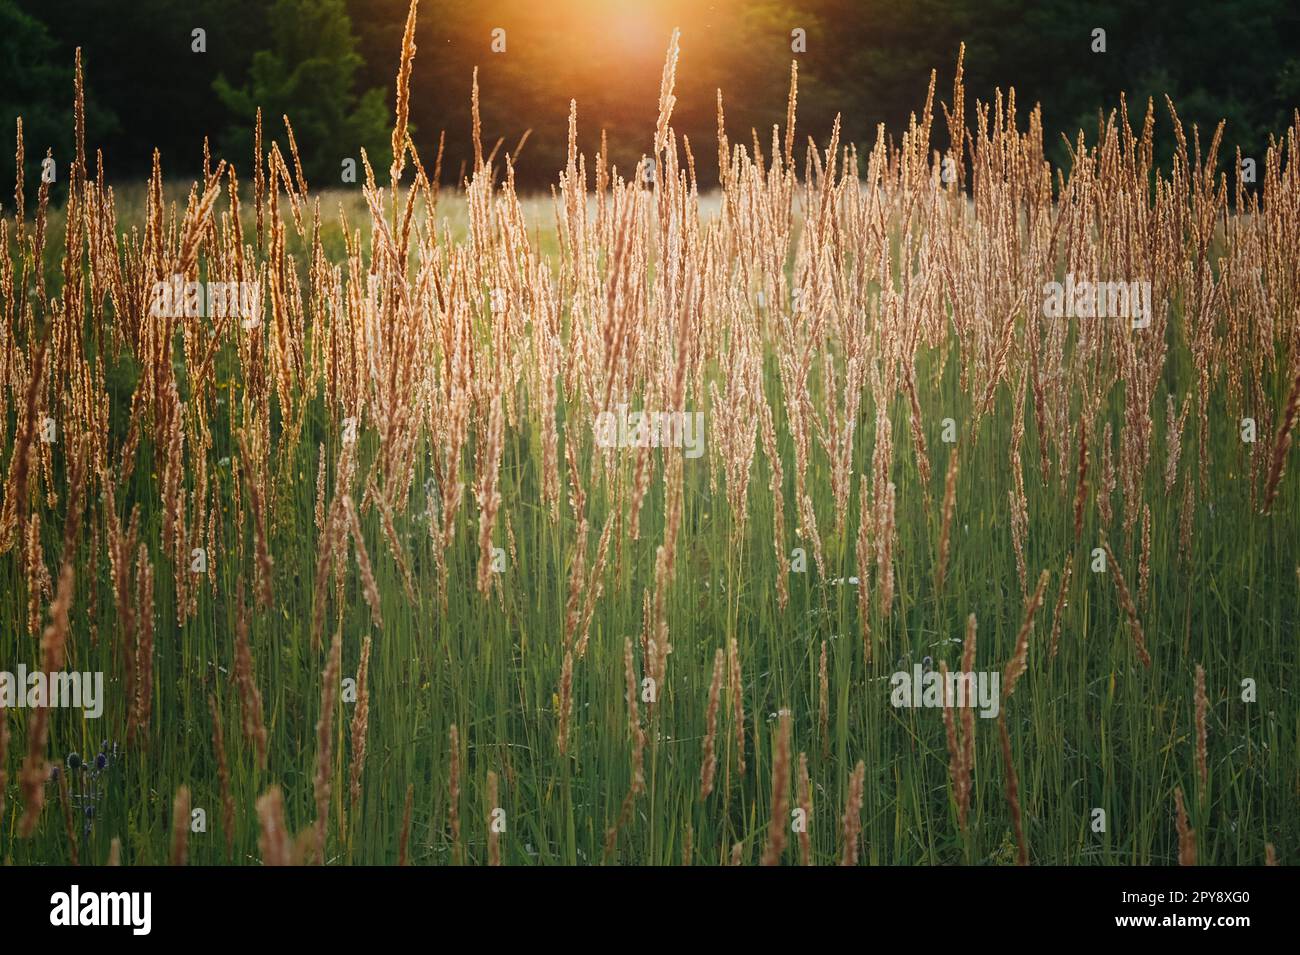 Close up agricultural crop field under sunlight concept photo Stock Photo